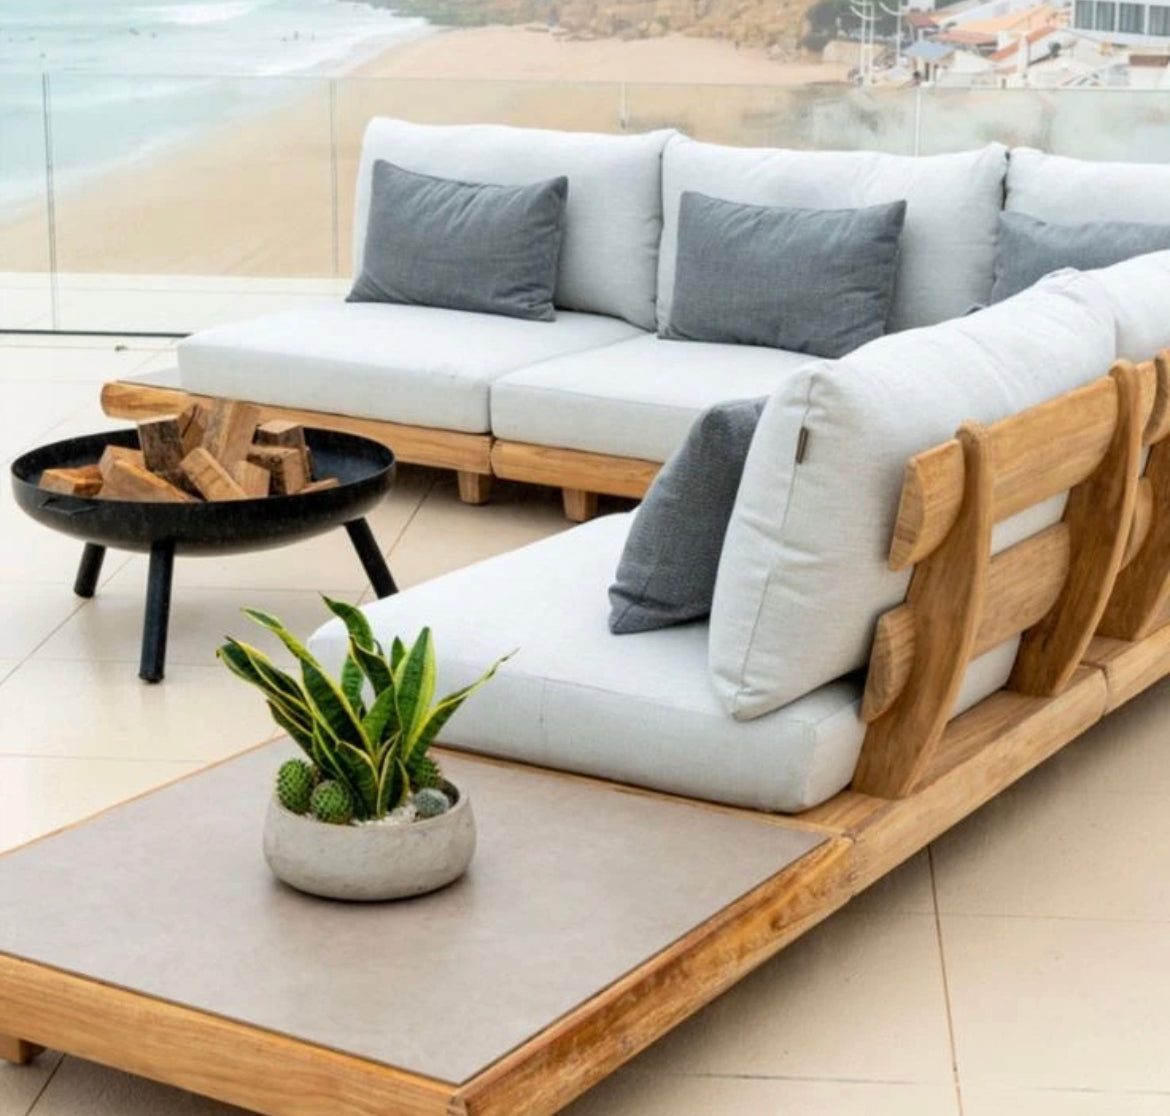 Outdoor Furniture Sets Modern Solid Wood Cushions Sofa Garden Patio Outdoor Sectional Sofas